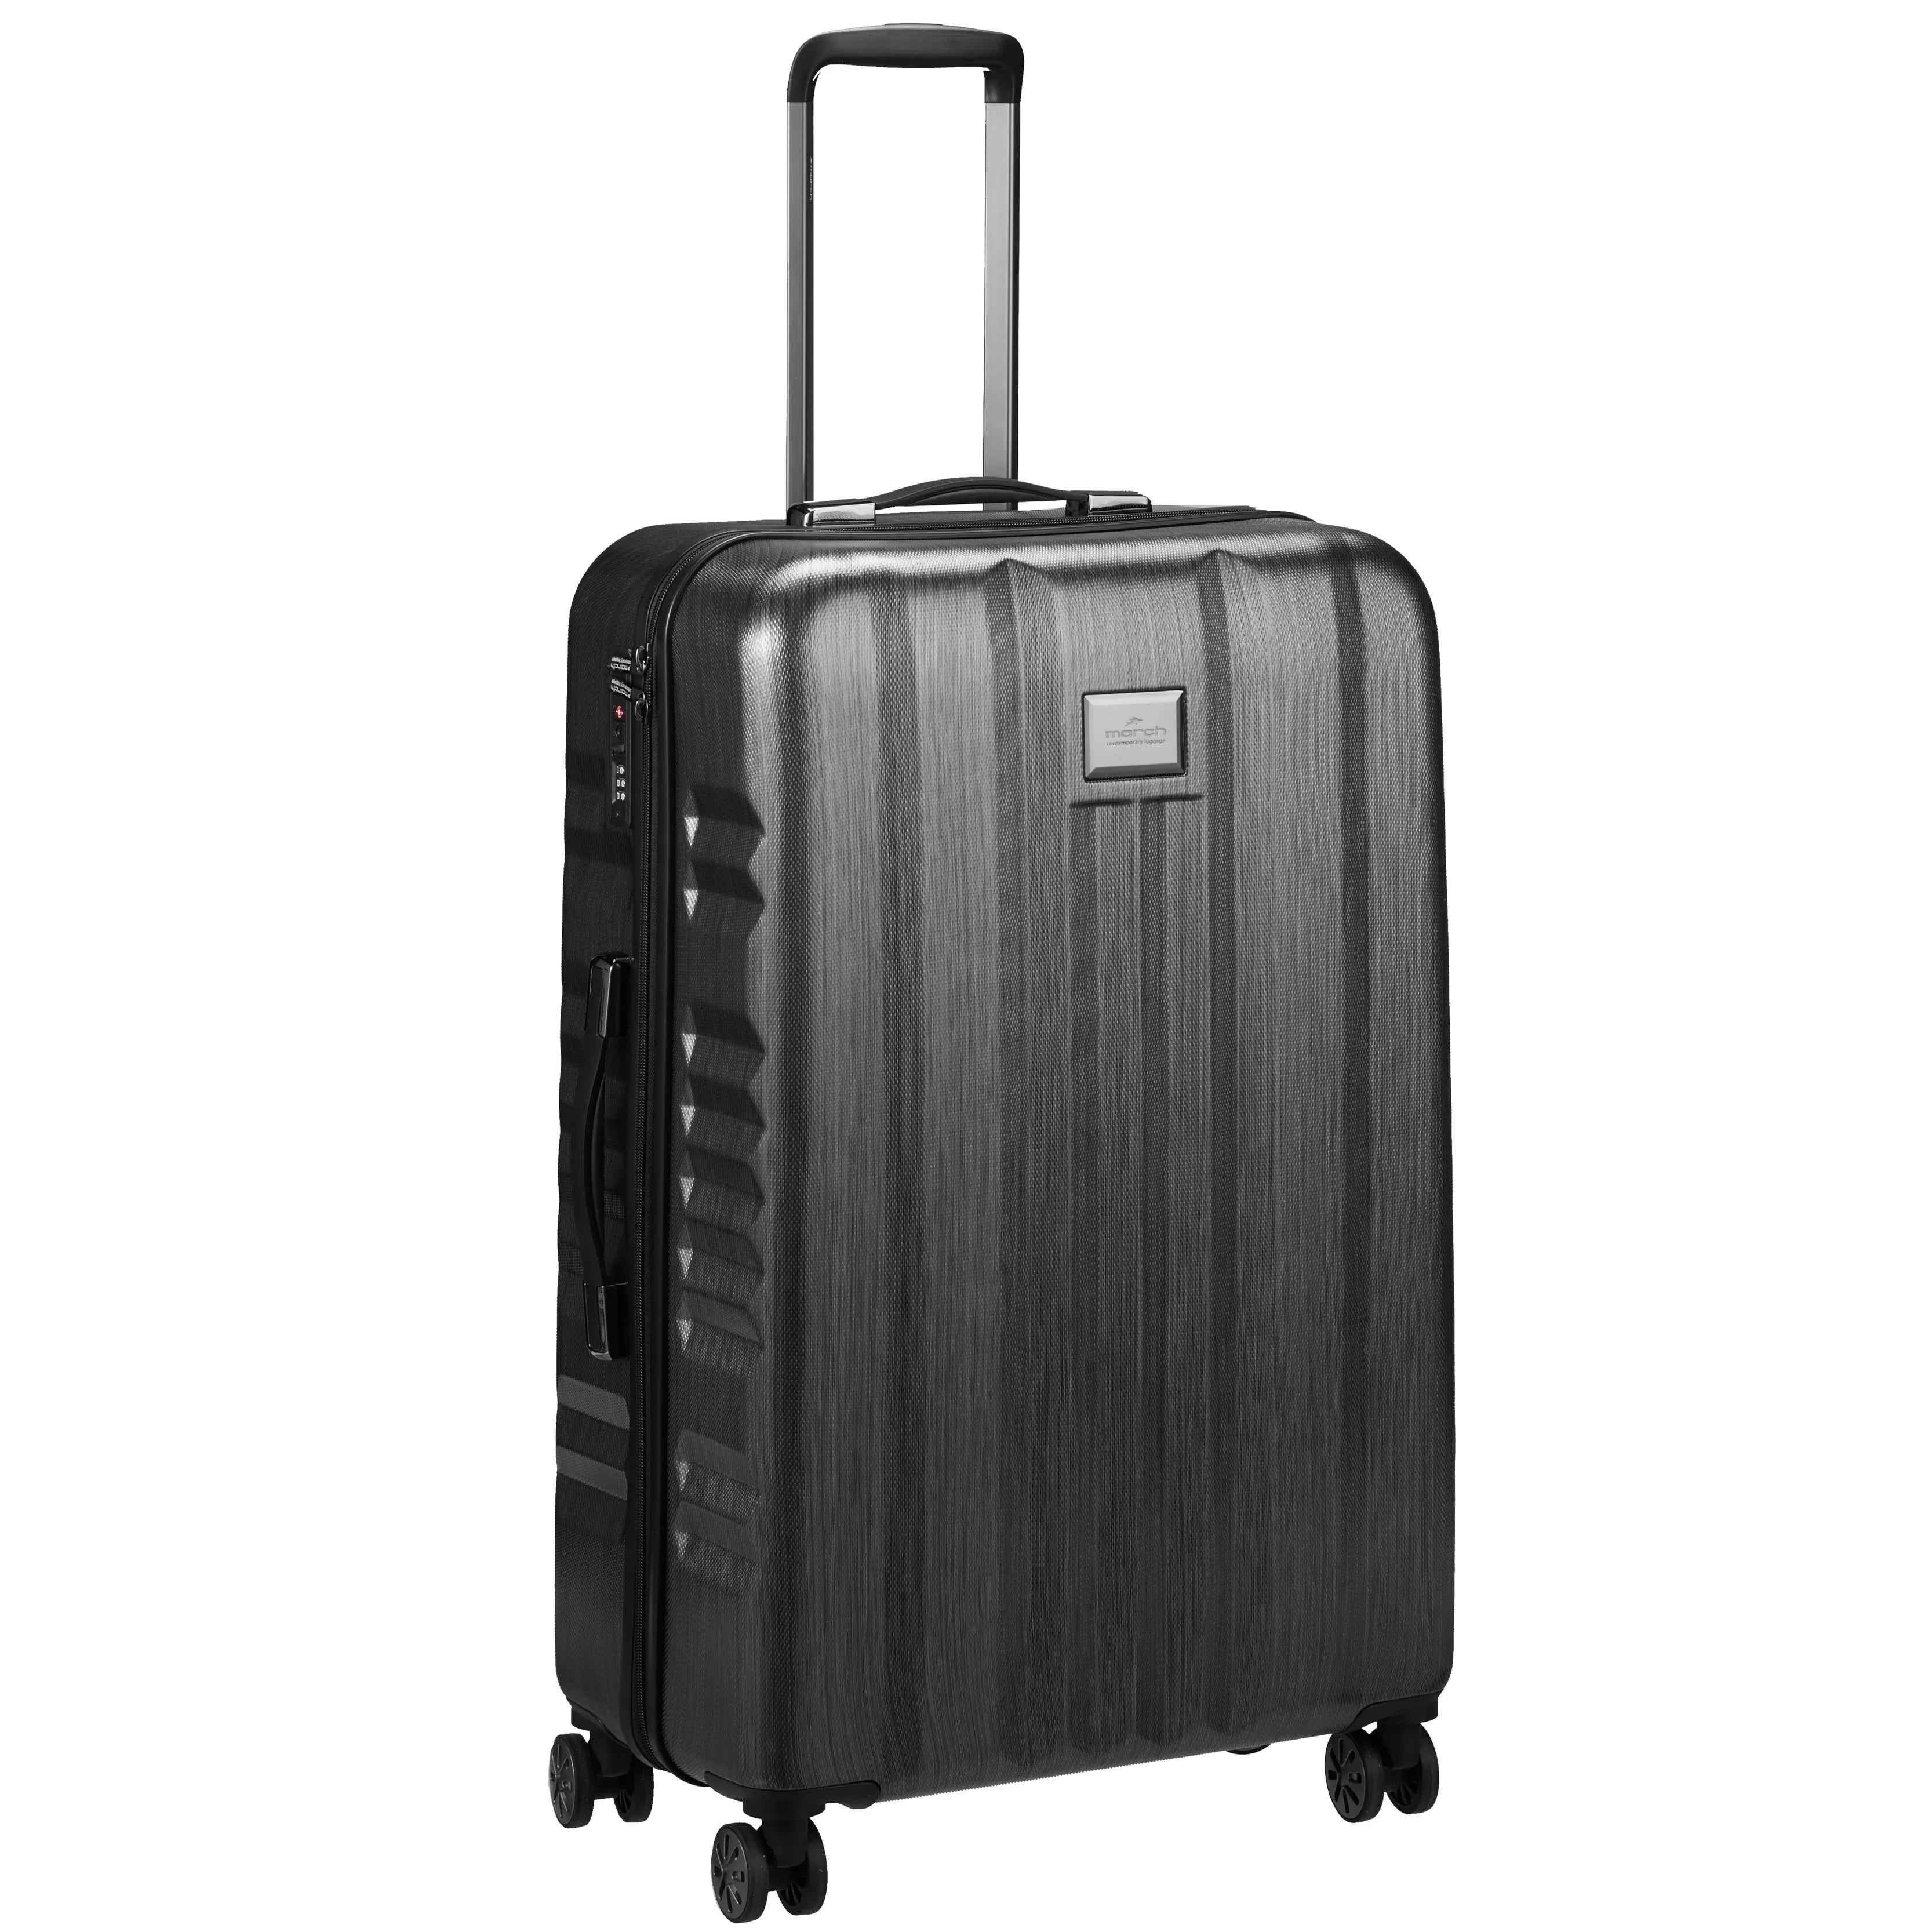 March 15 Trading Fly 4-Rollen Trolley 75 cm - black brushed